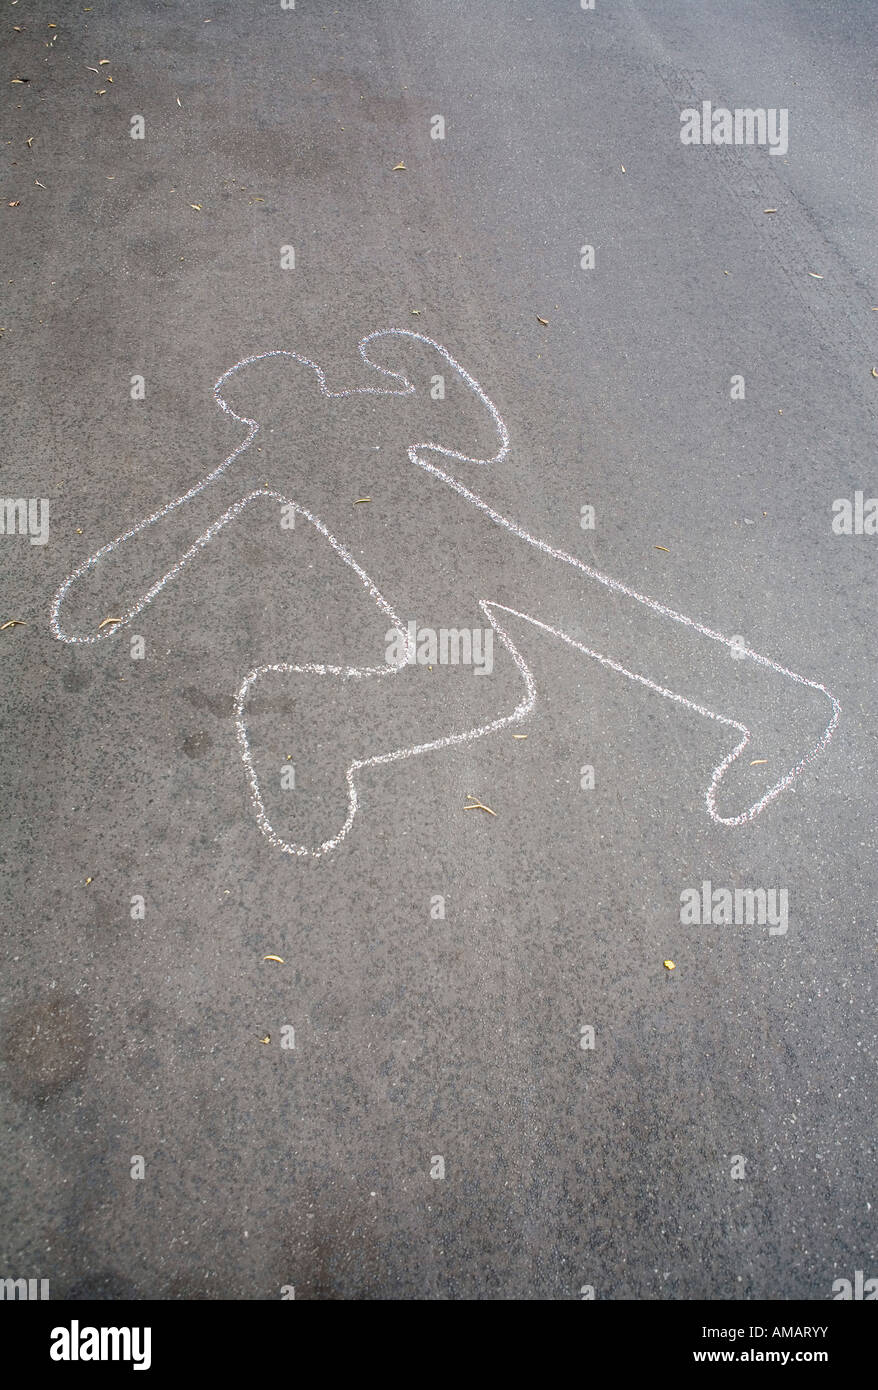 A chalk outline of a body on the road Stock Photo